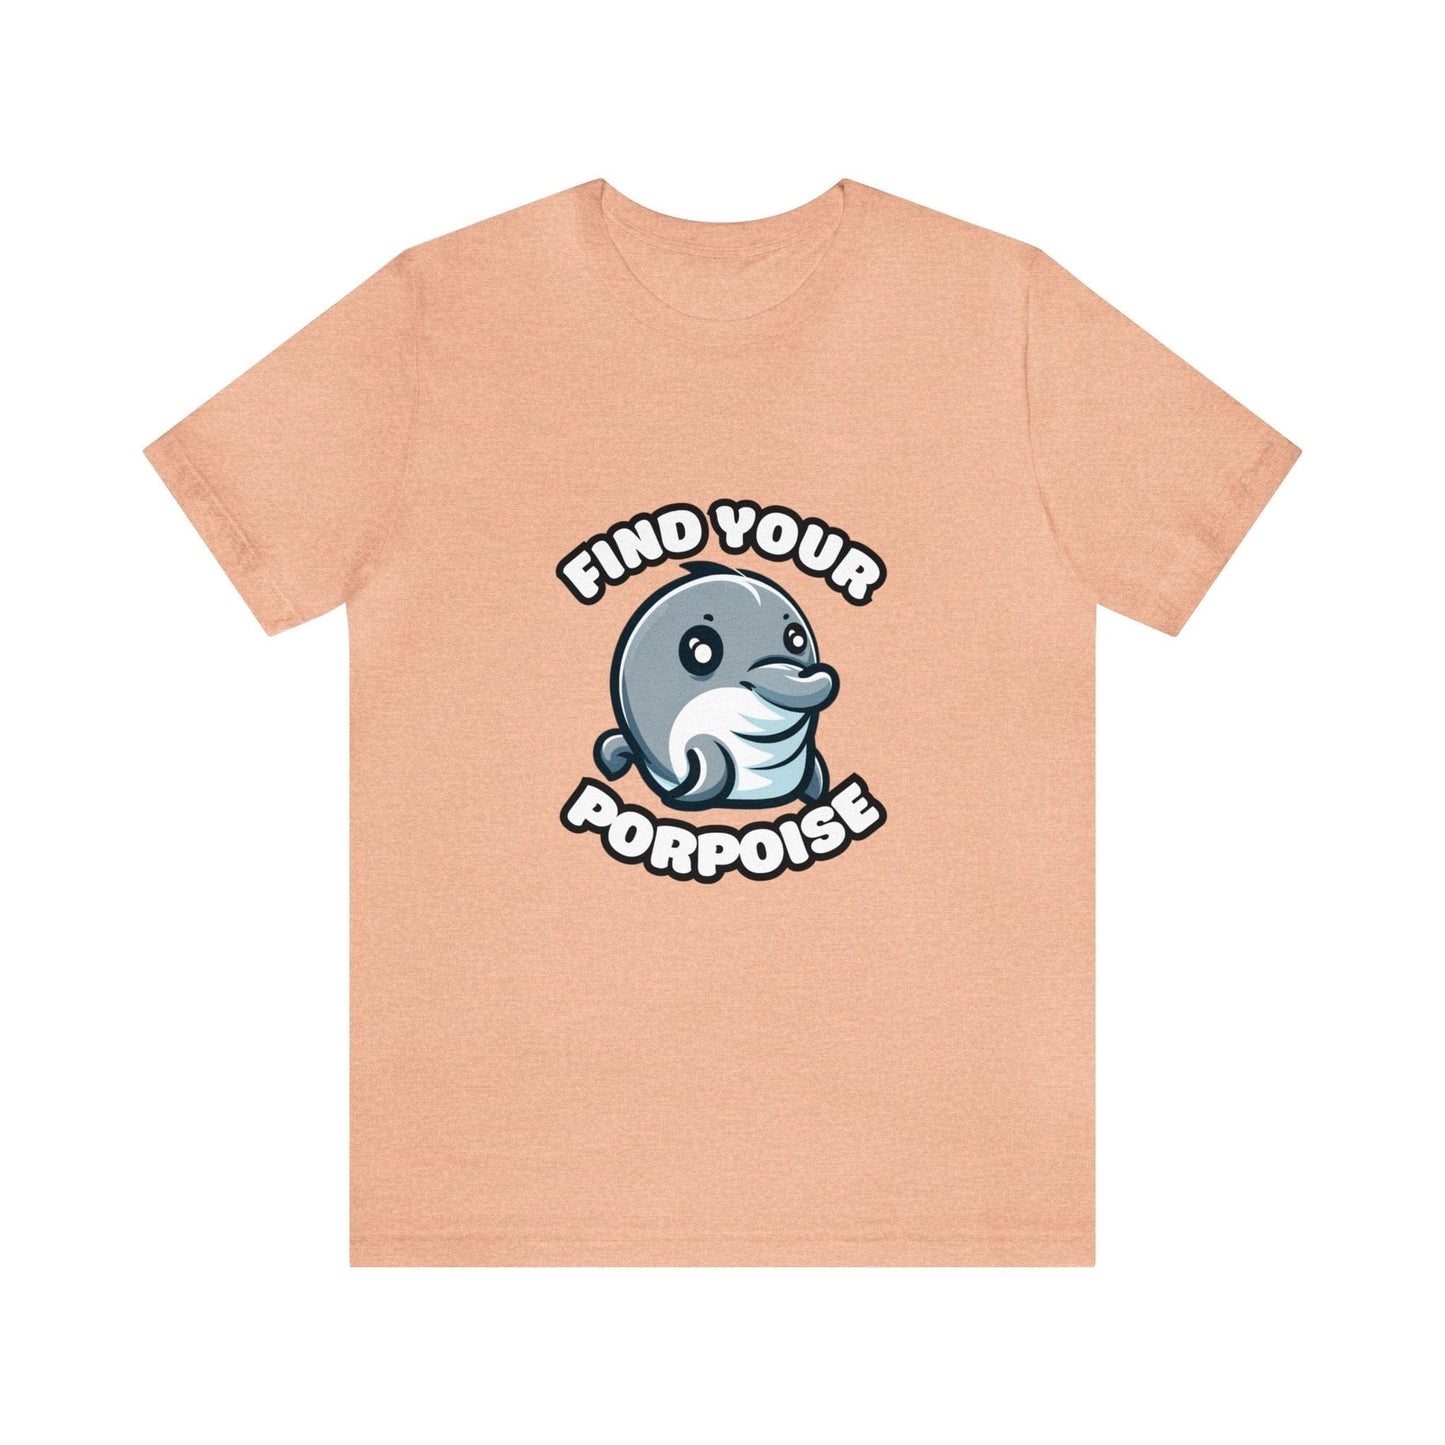 US - Find Your Porpoise - Porpoise T-shirt Heather Peach / S